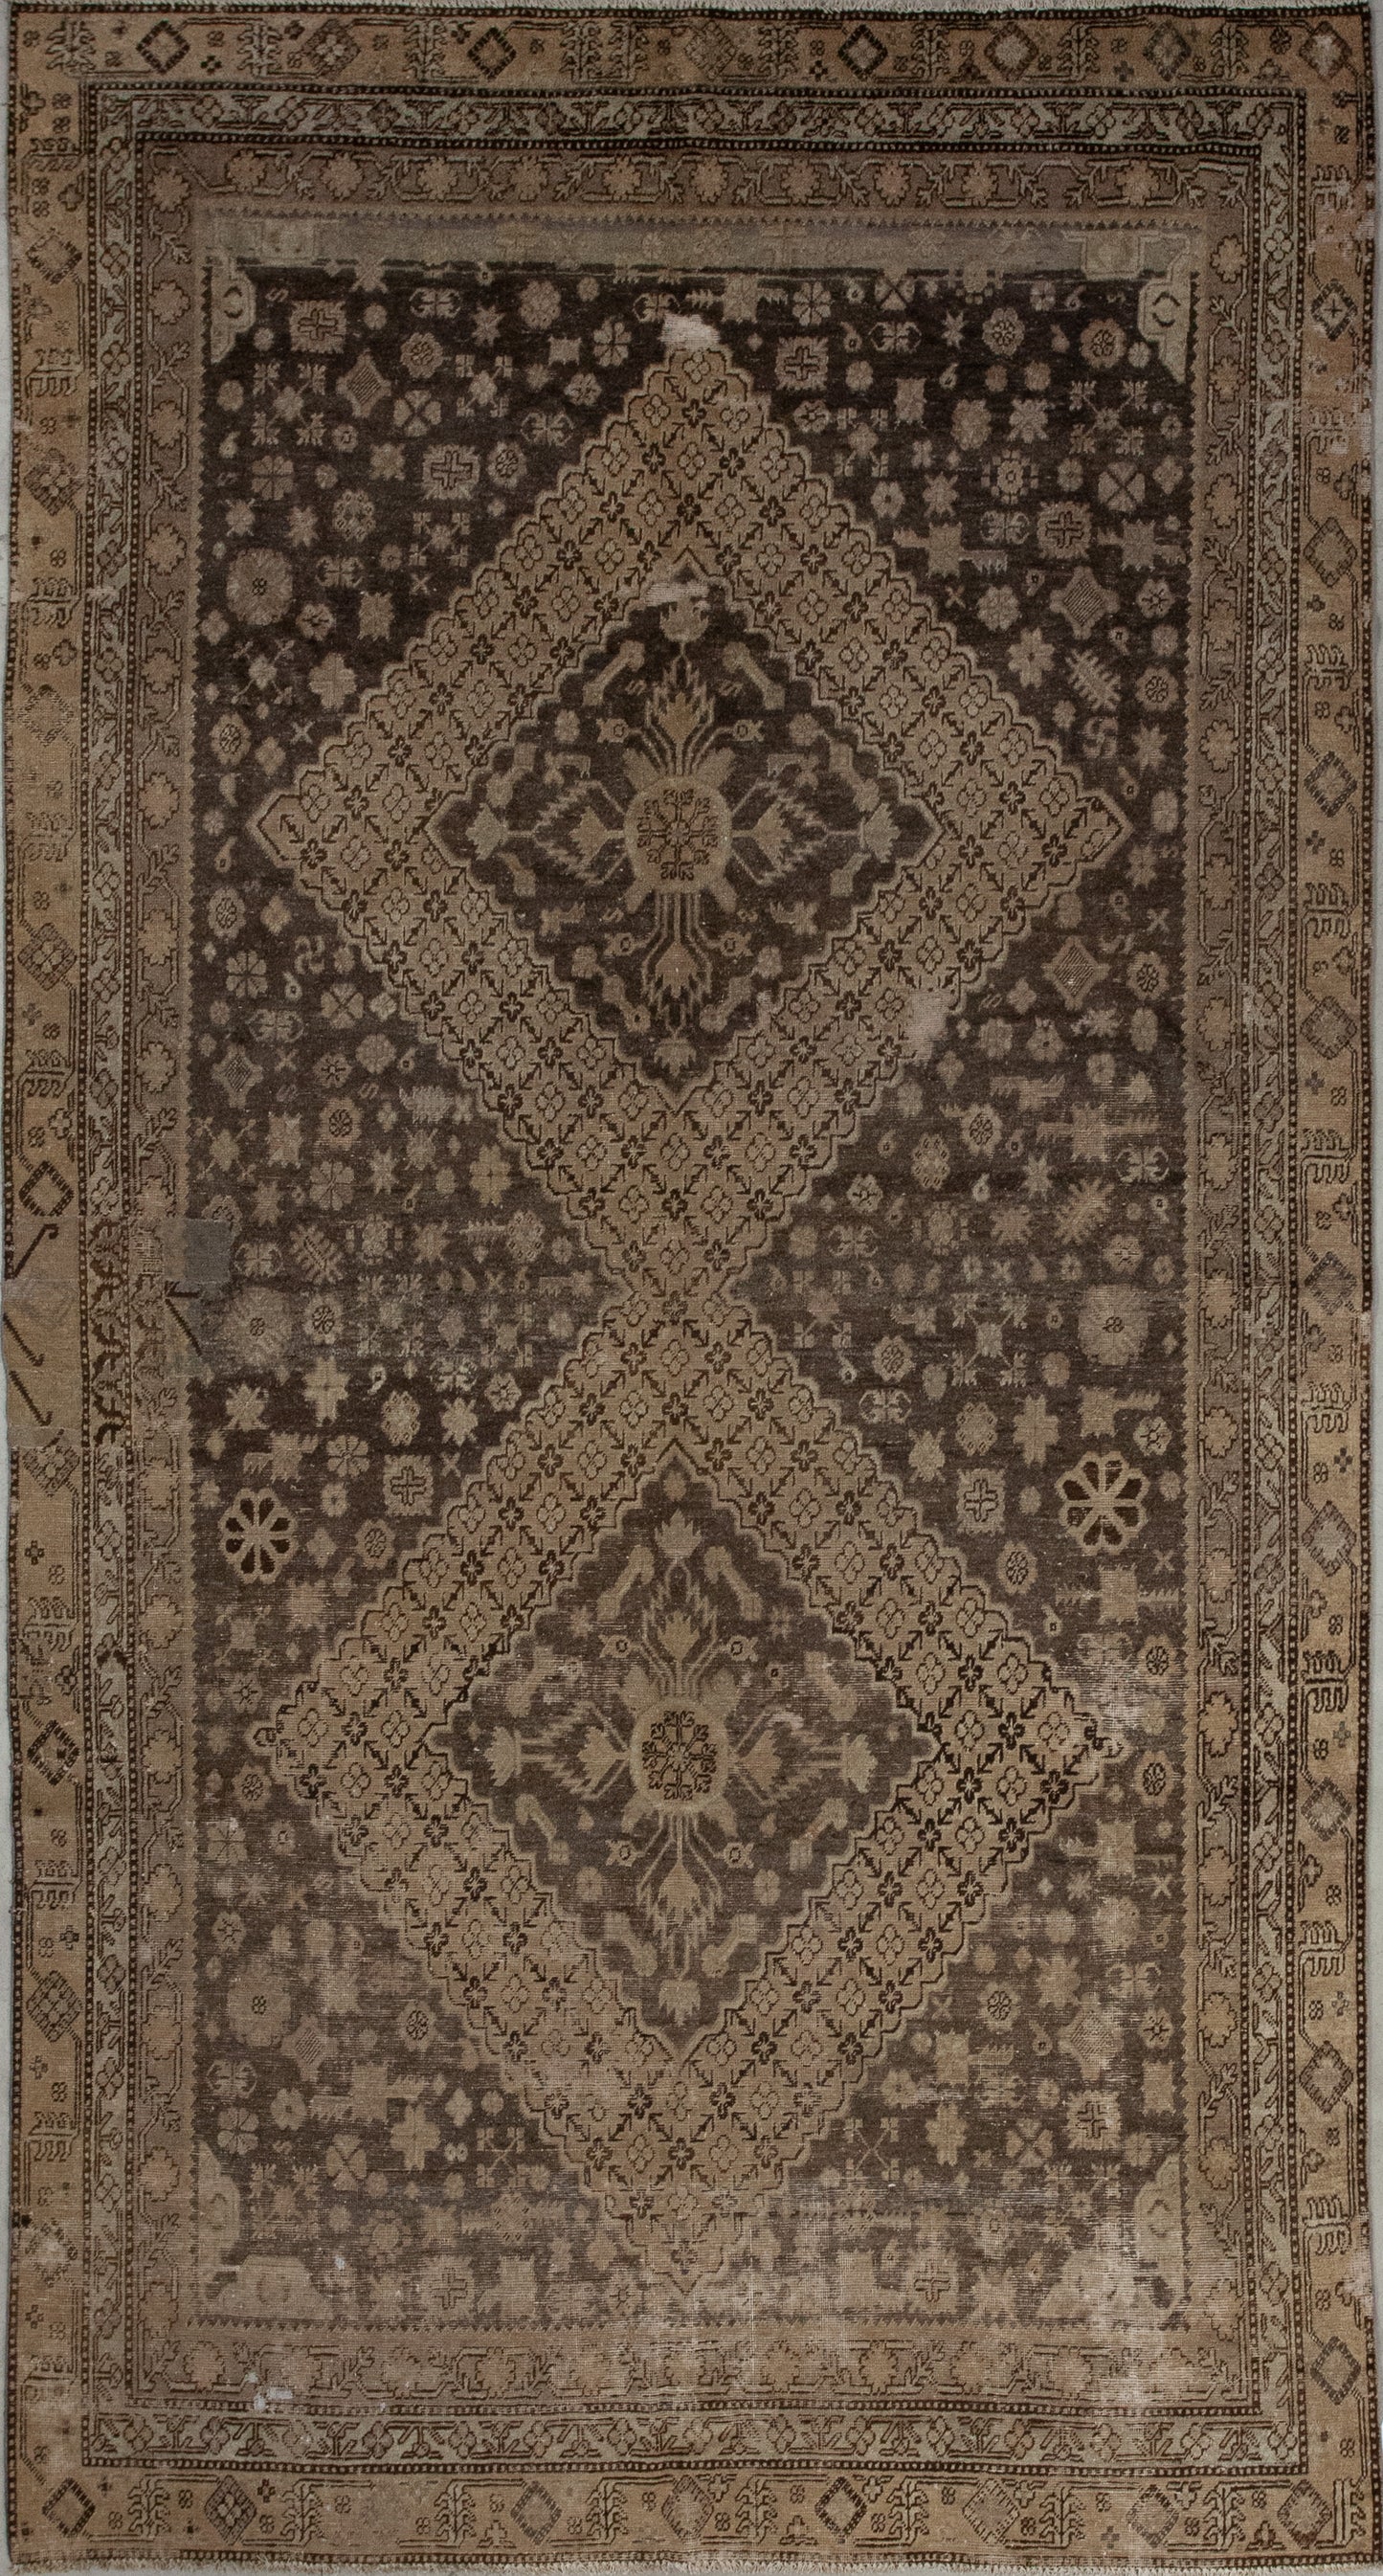 The simplicity of this carpet makes it a great asset for your home because the color scheme oscillates among variations of brown. The design features two huge rhombuses which have tiny flowers as a pattern in the contour holding mandalas in the center.